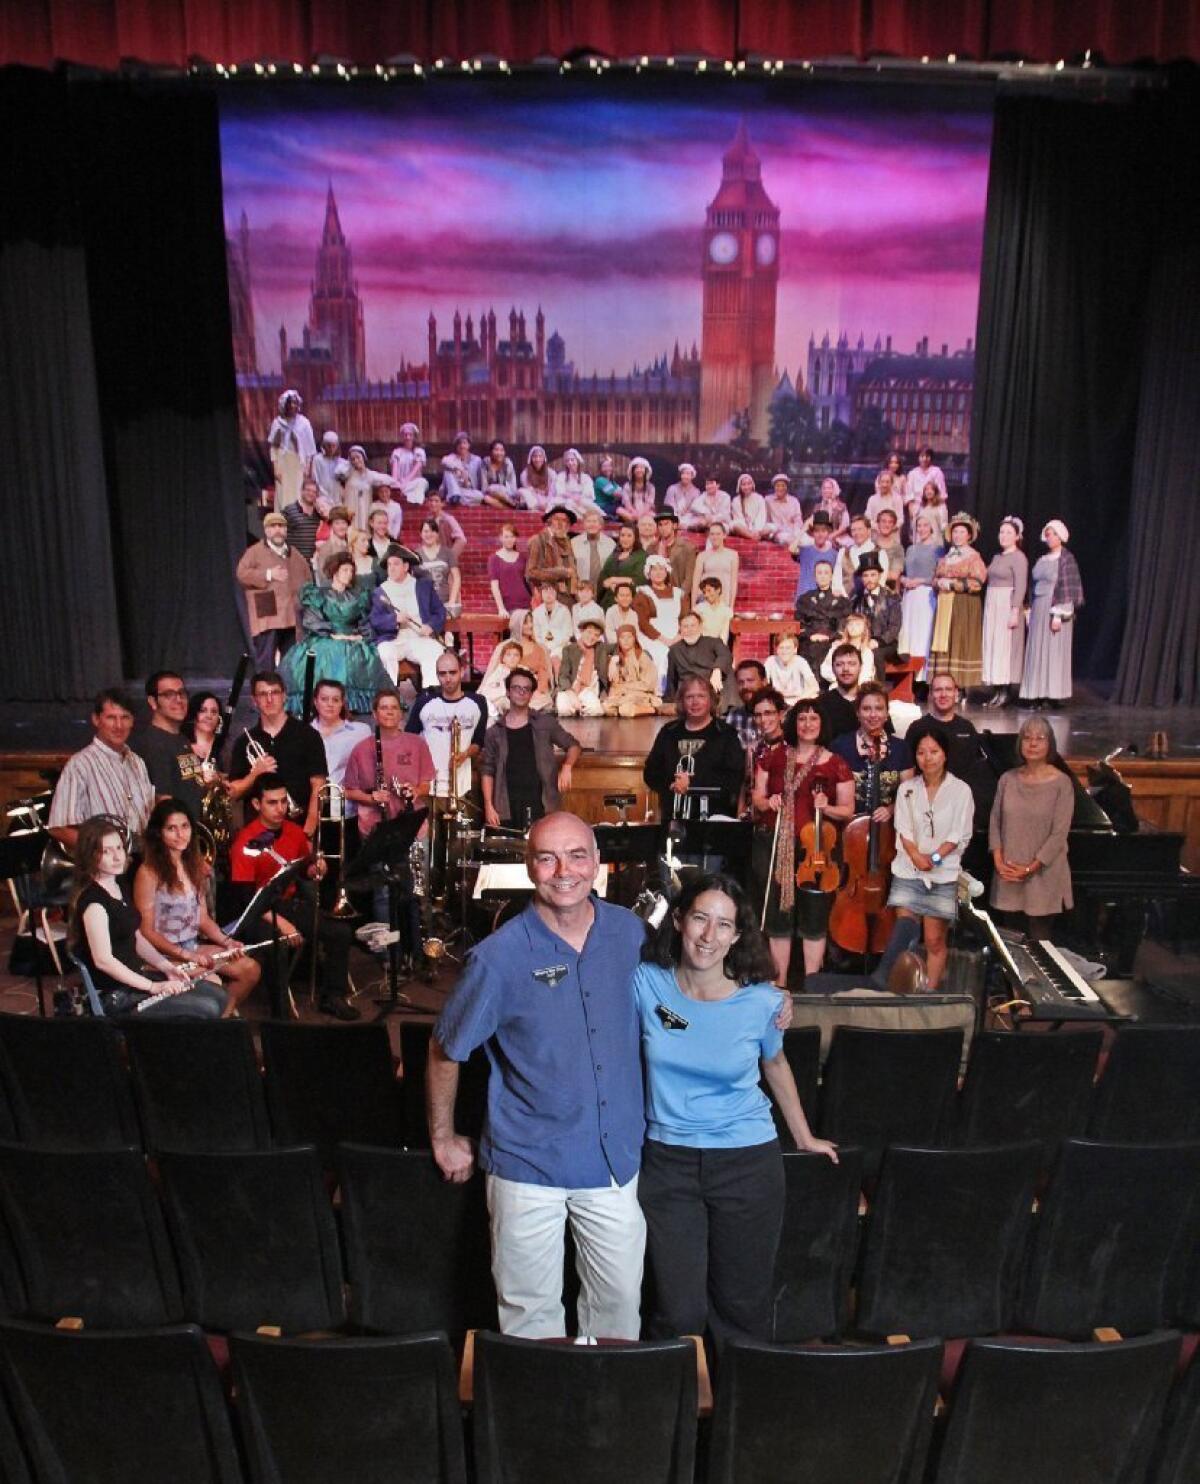 Associate producer Kurt Sawitskas and show producer April McCaffery with the cast, crew and orchestra for their next production Oliver, at Hoover High School in Glendale.